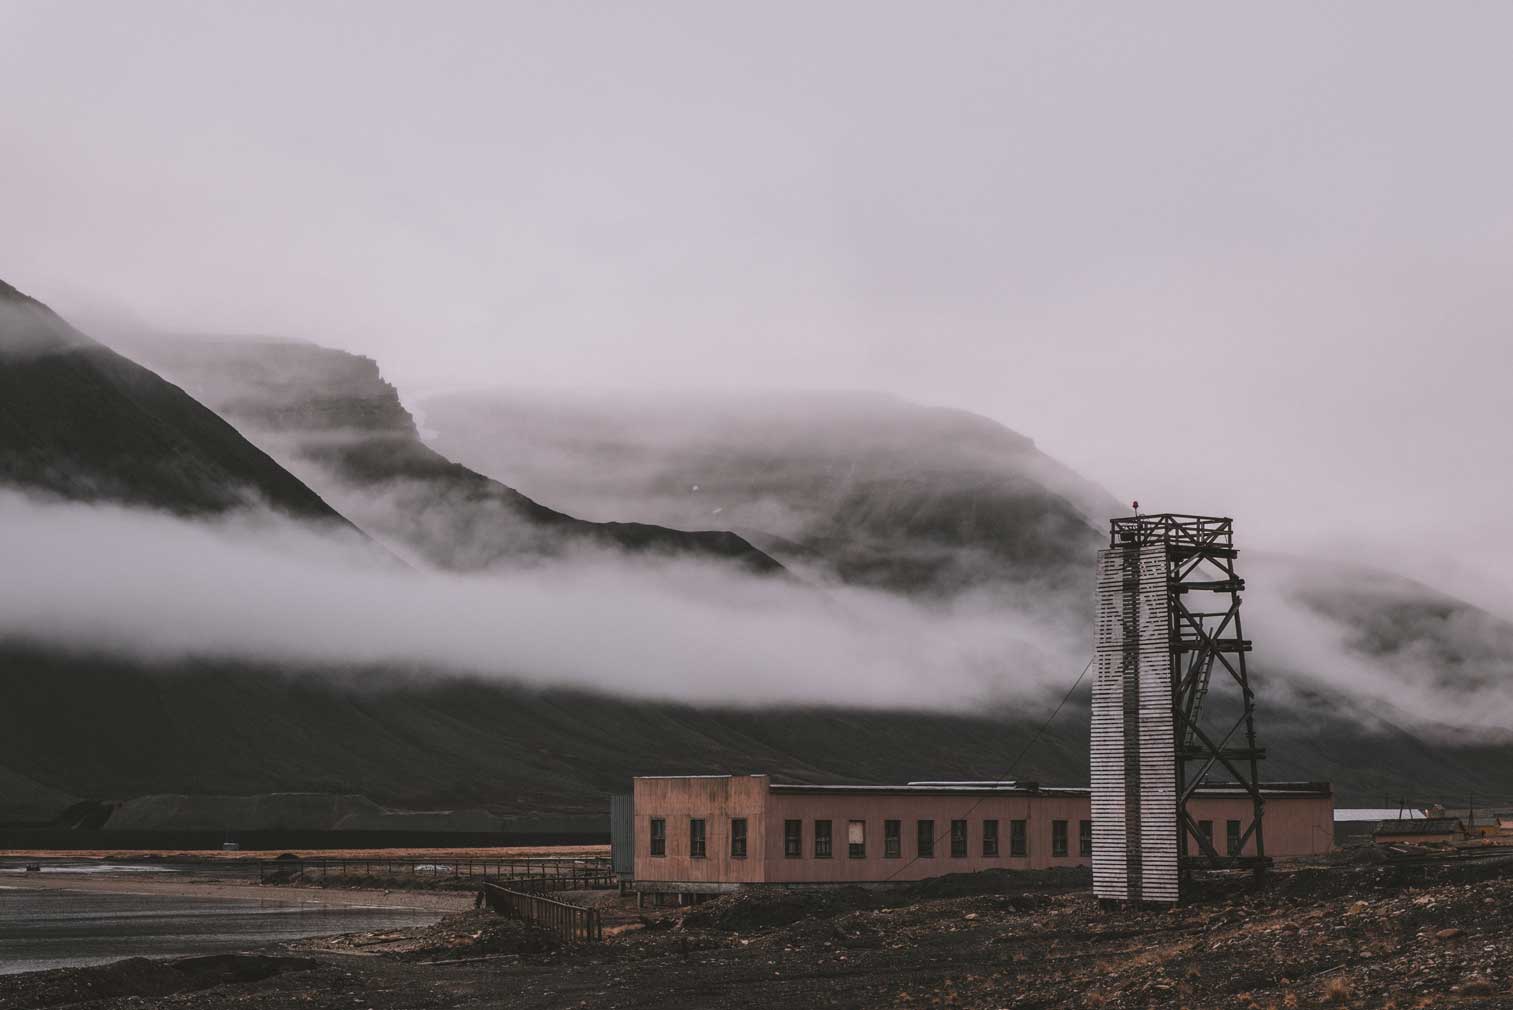 Tour the eerie abandoned mining town of Pyramiden